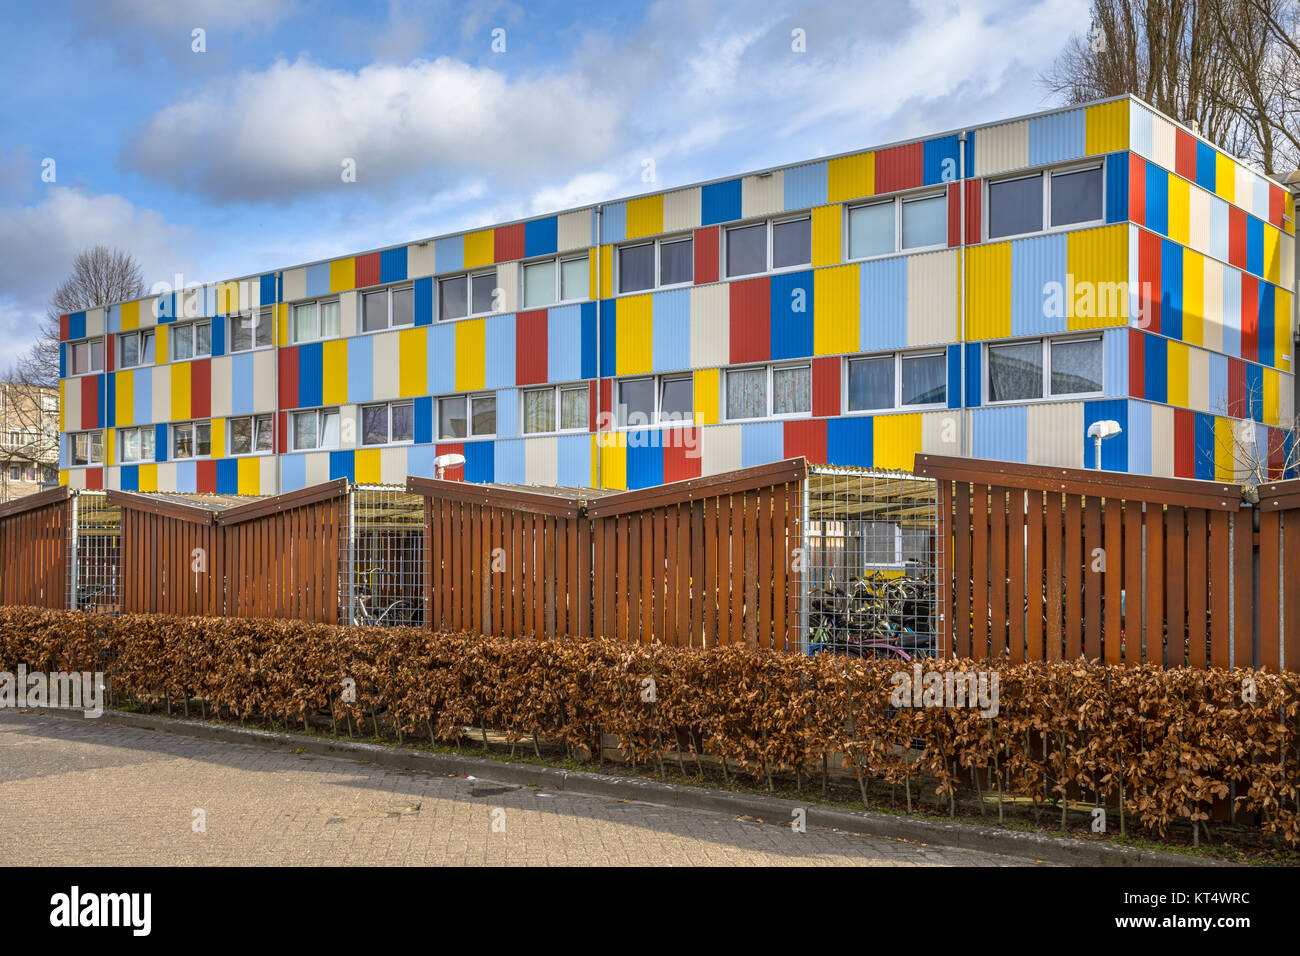 Student housing in shipping containers painted in pright colors with bicycle parking in the foreground Stock Photo